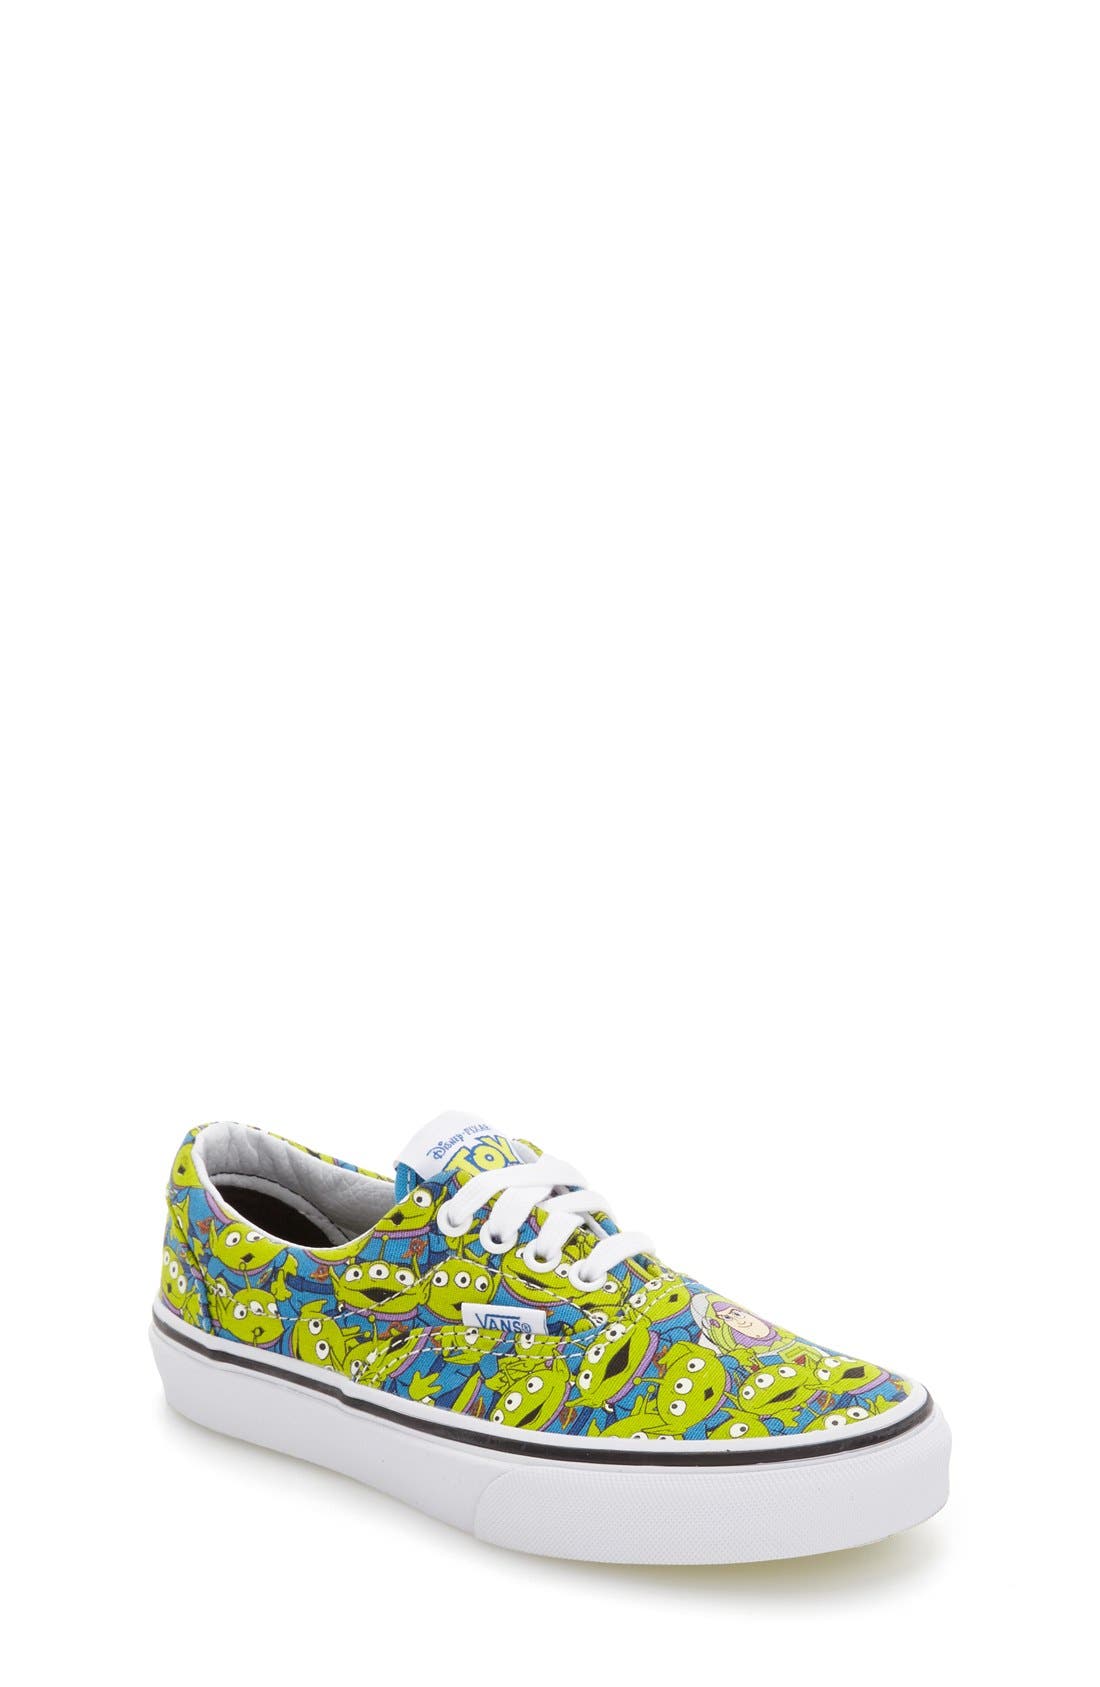 toy story vans high tops